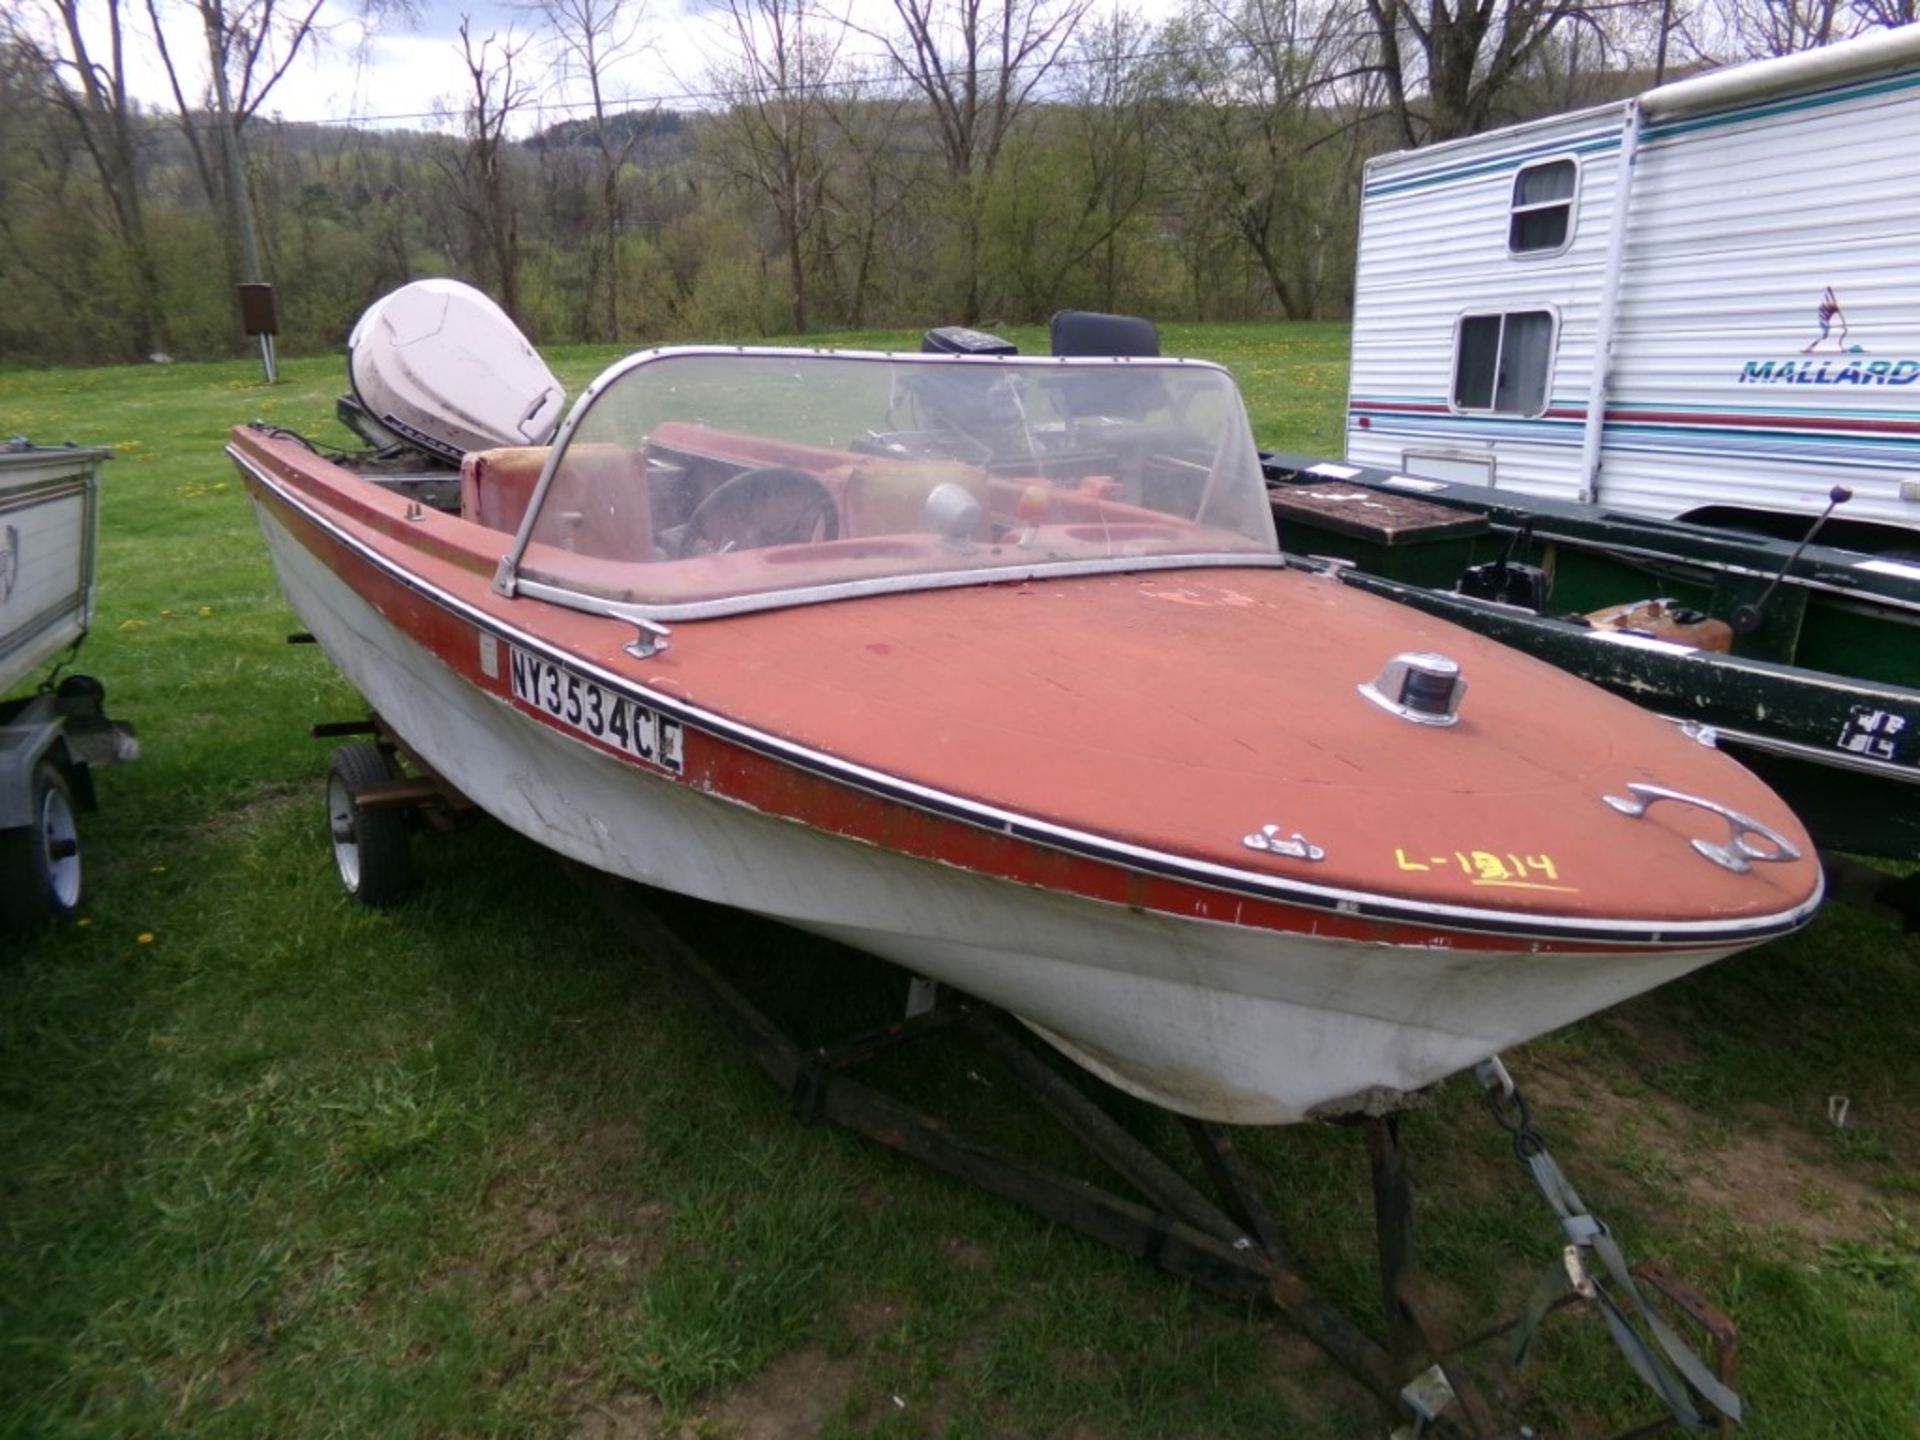 14-16' Closed Bow Fiberglass Boat with 80 HP Johnson Outboard on Single Axle Trailer, NO PAPERWORK /